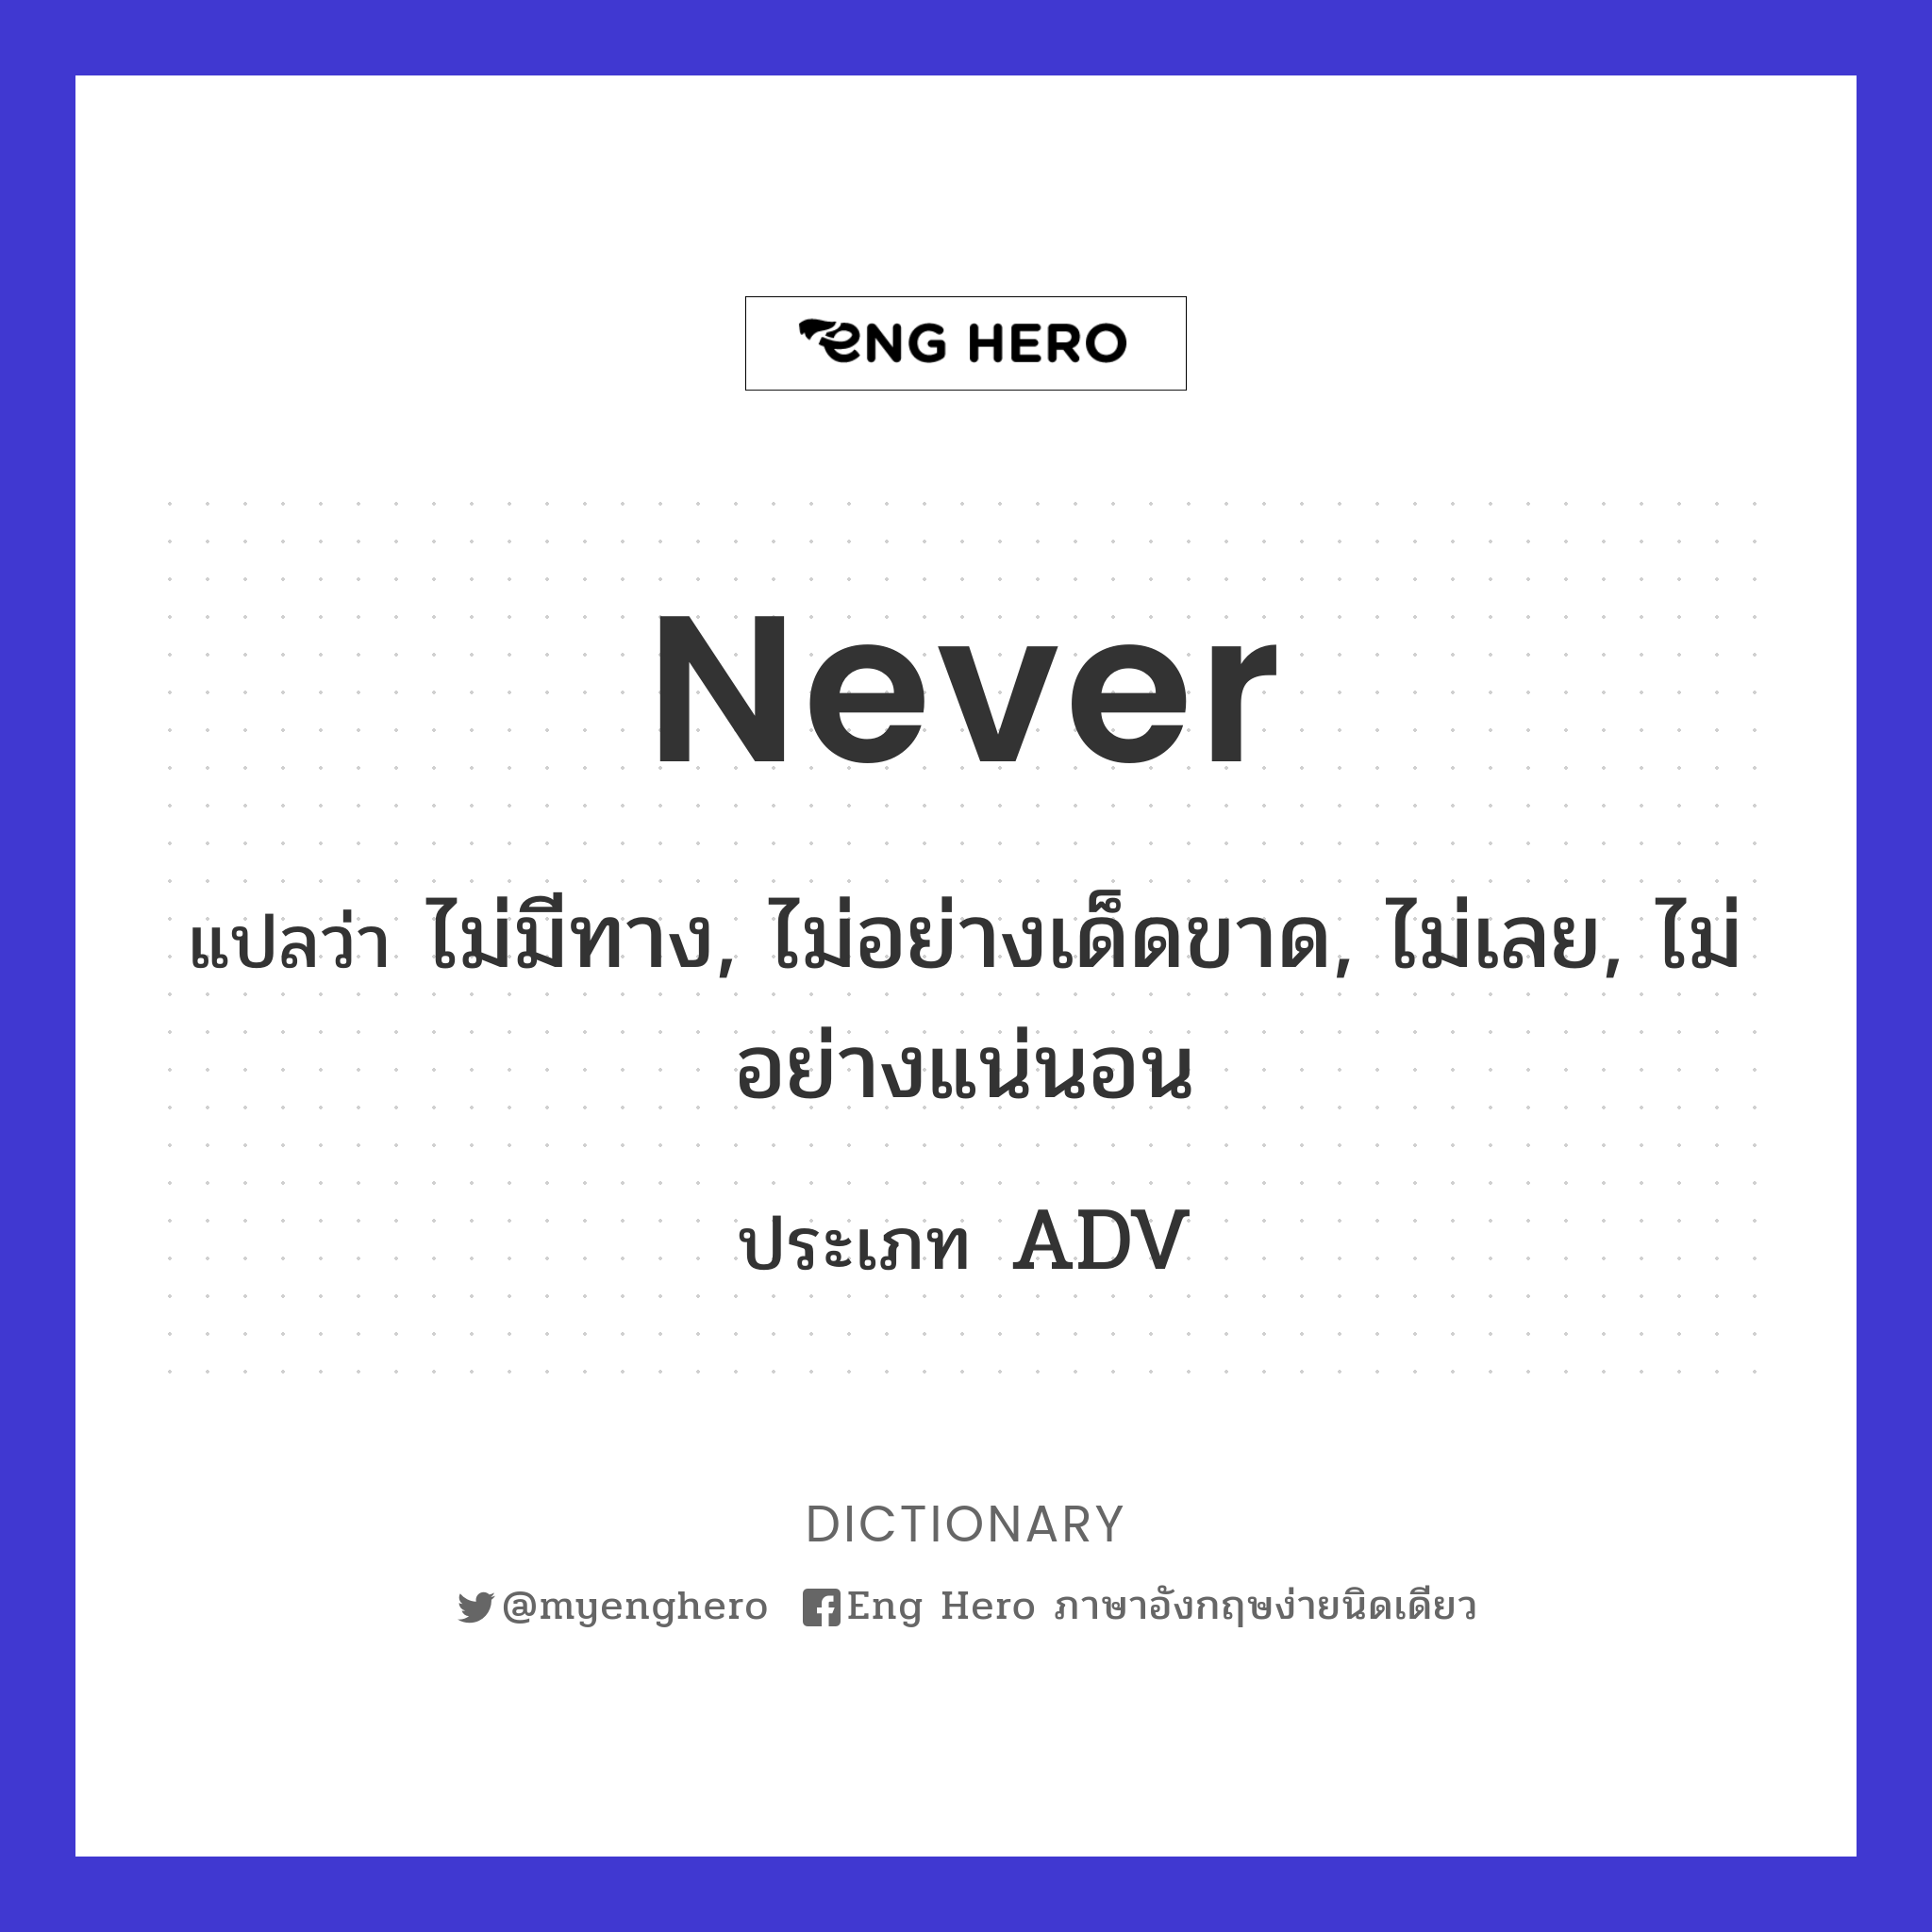 never